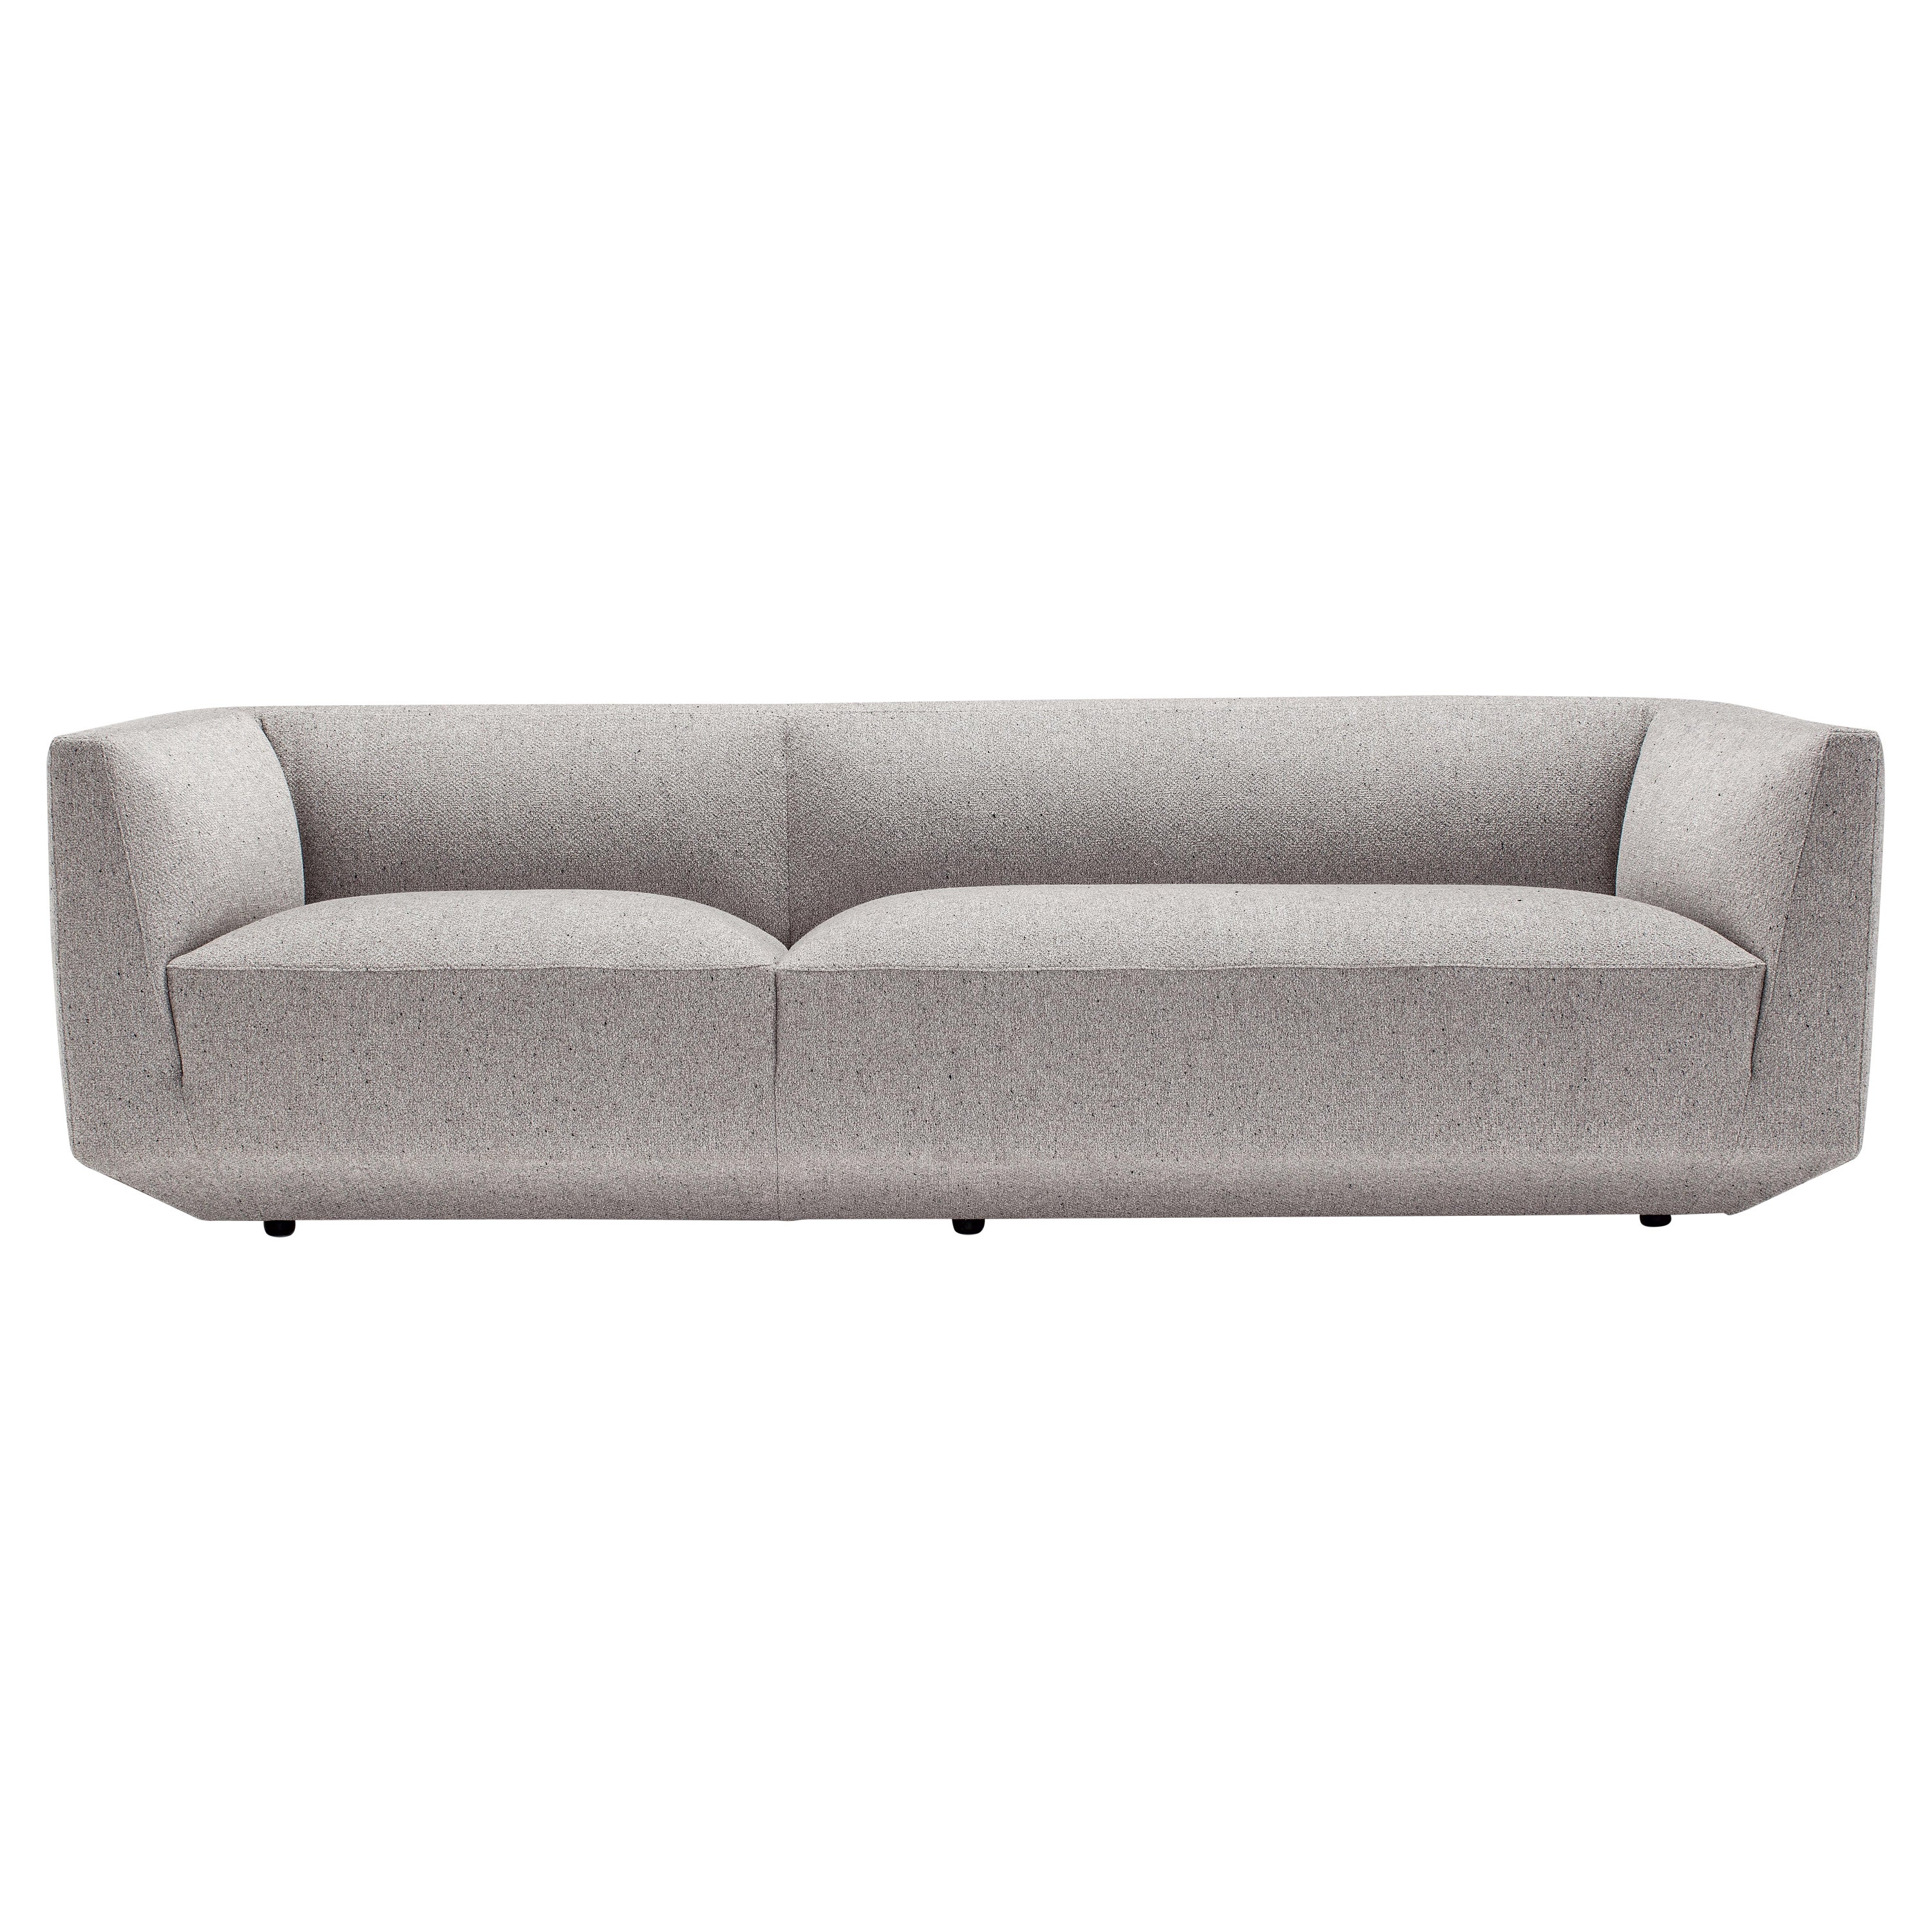 Contemporary Sofa 'Panis' by Amura Lab, Module 583, Trama 216 For Sale